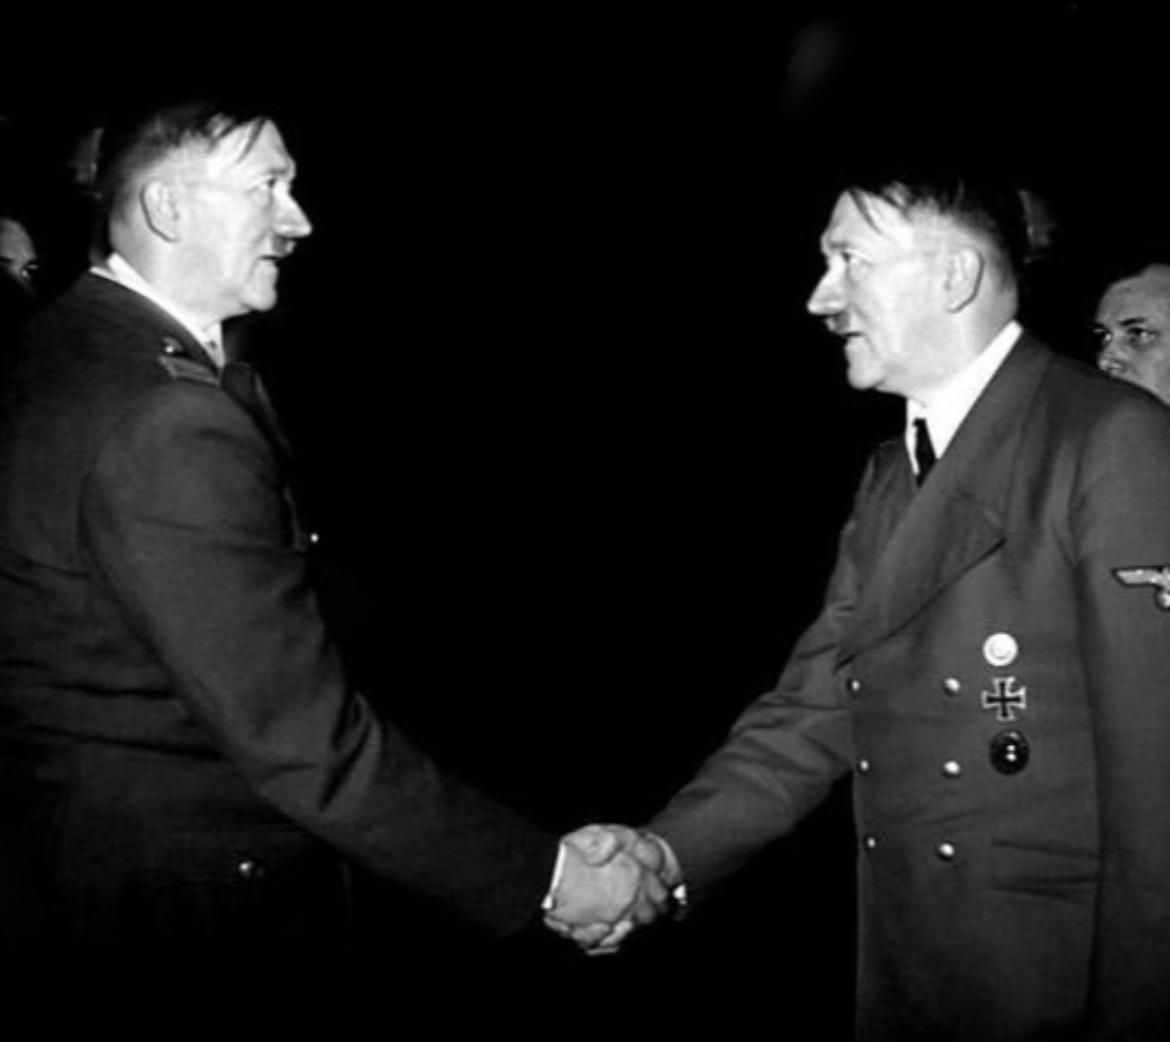 Adolf Hitler meets the man who would eventually assassinate him years later,